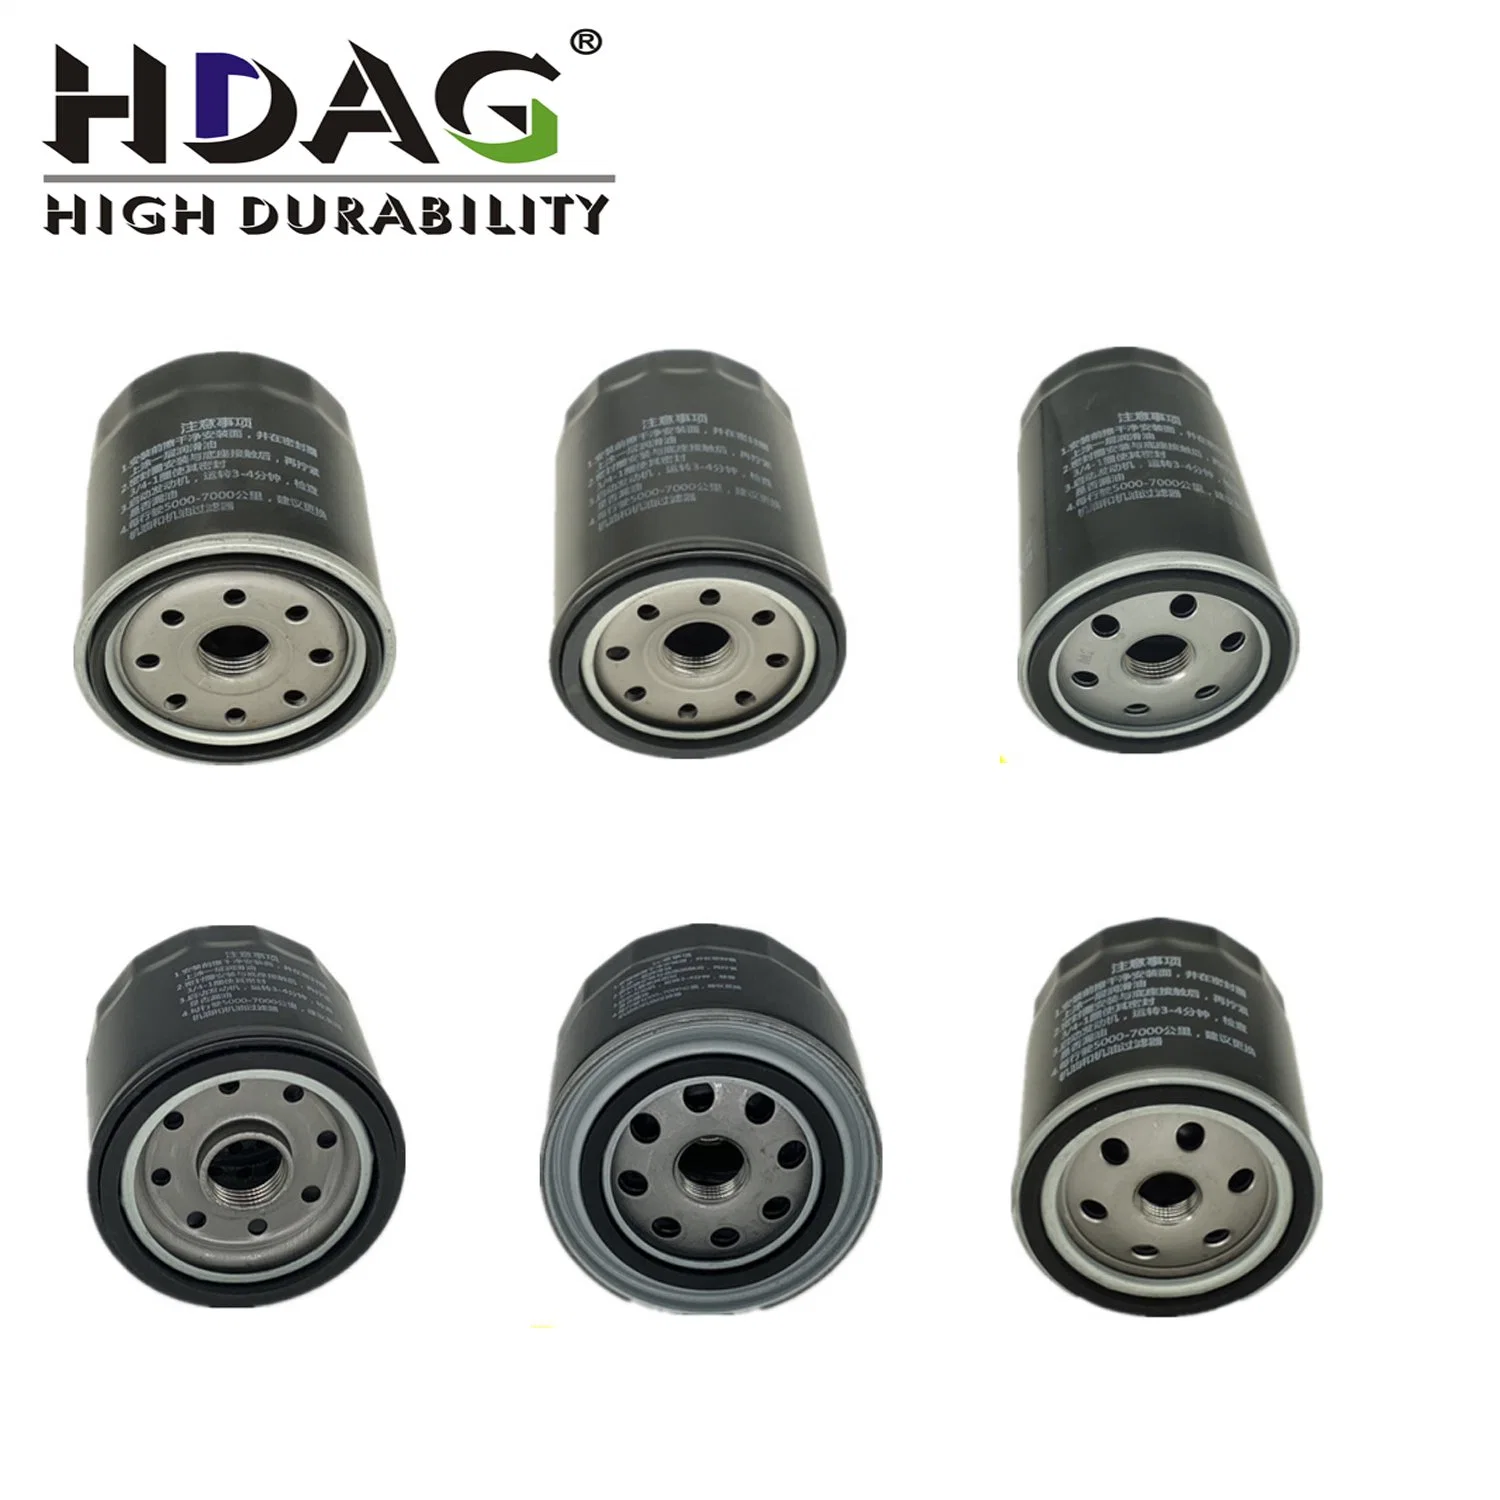 Hdag Auto Spare Parts Element OEM 1012200f0000 481h-1012010 Super Oil Filter Cabin Air Oil Filter for Chery Dongfeng Haima JAC Toyota Lexus Infiniti Fx35 Q60